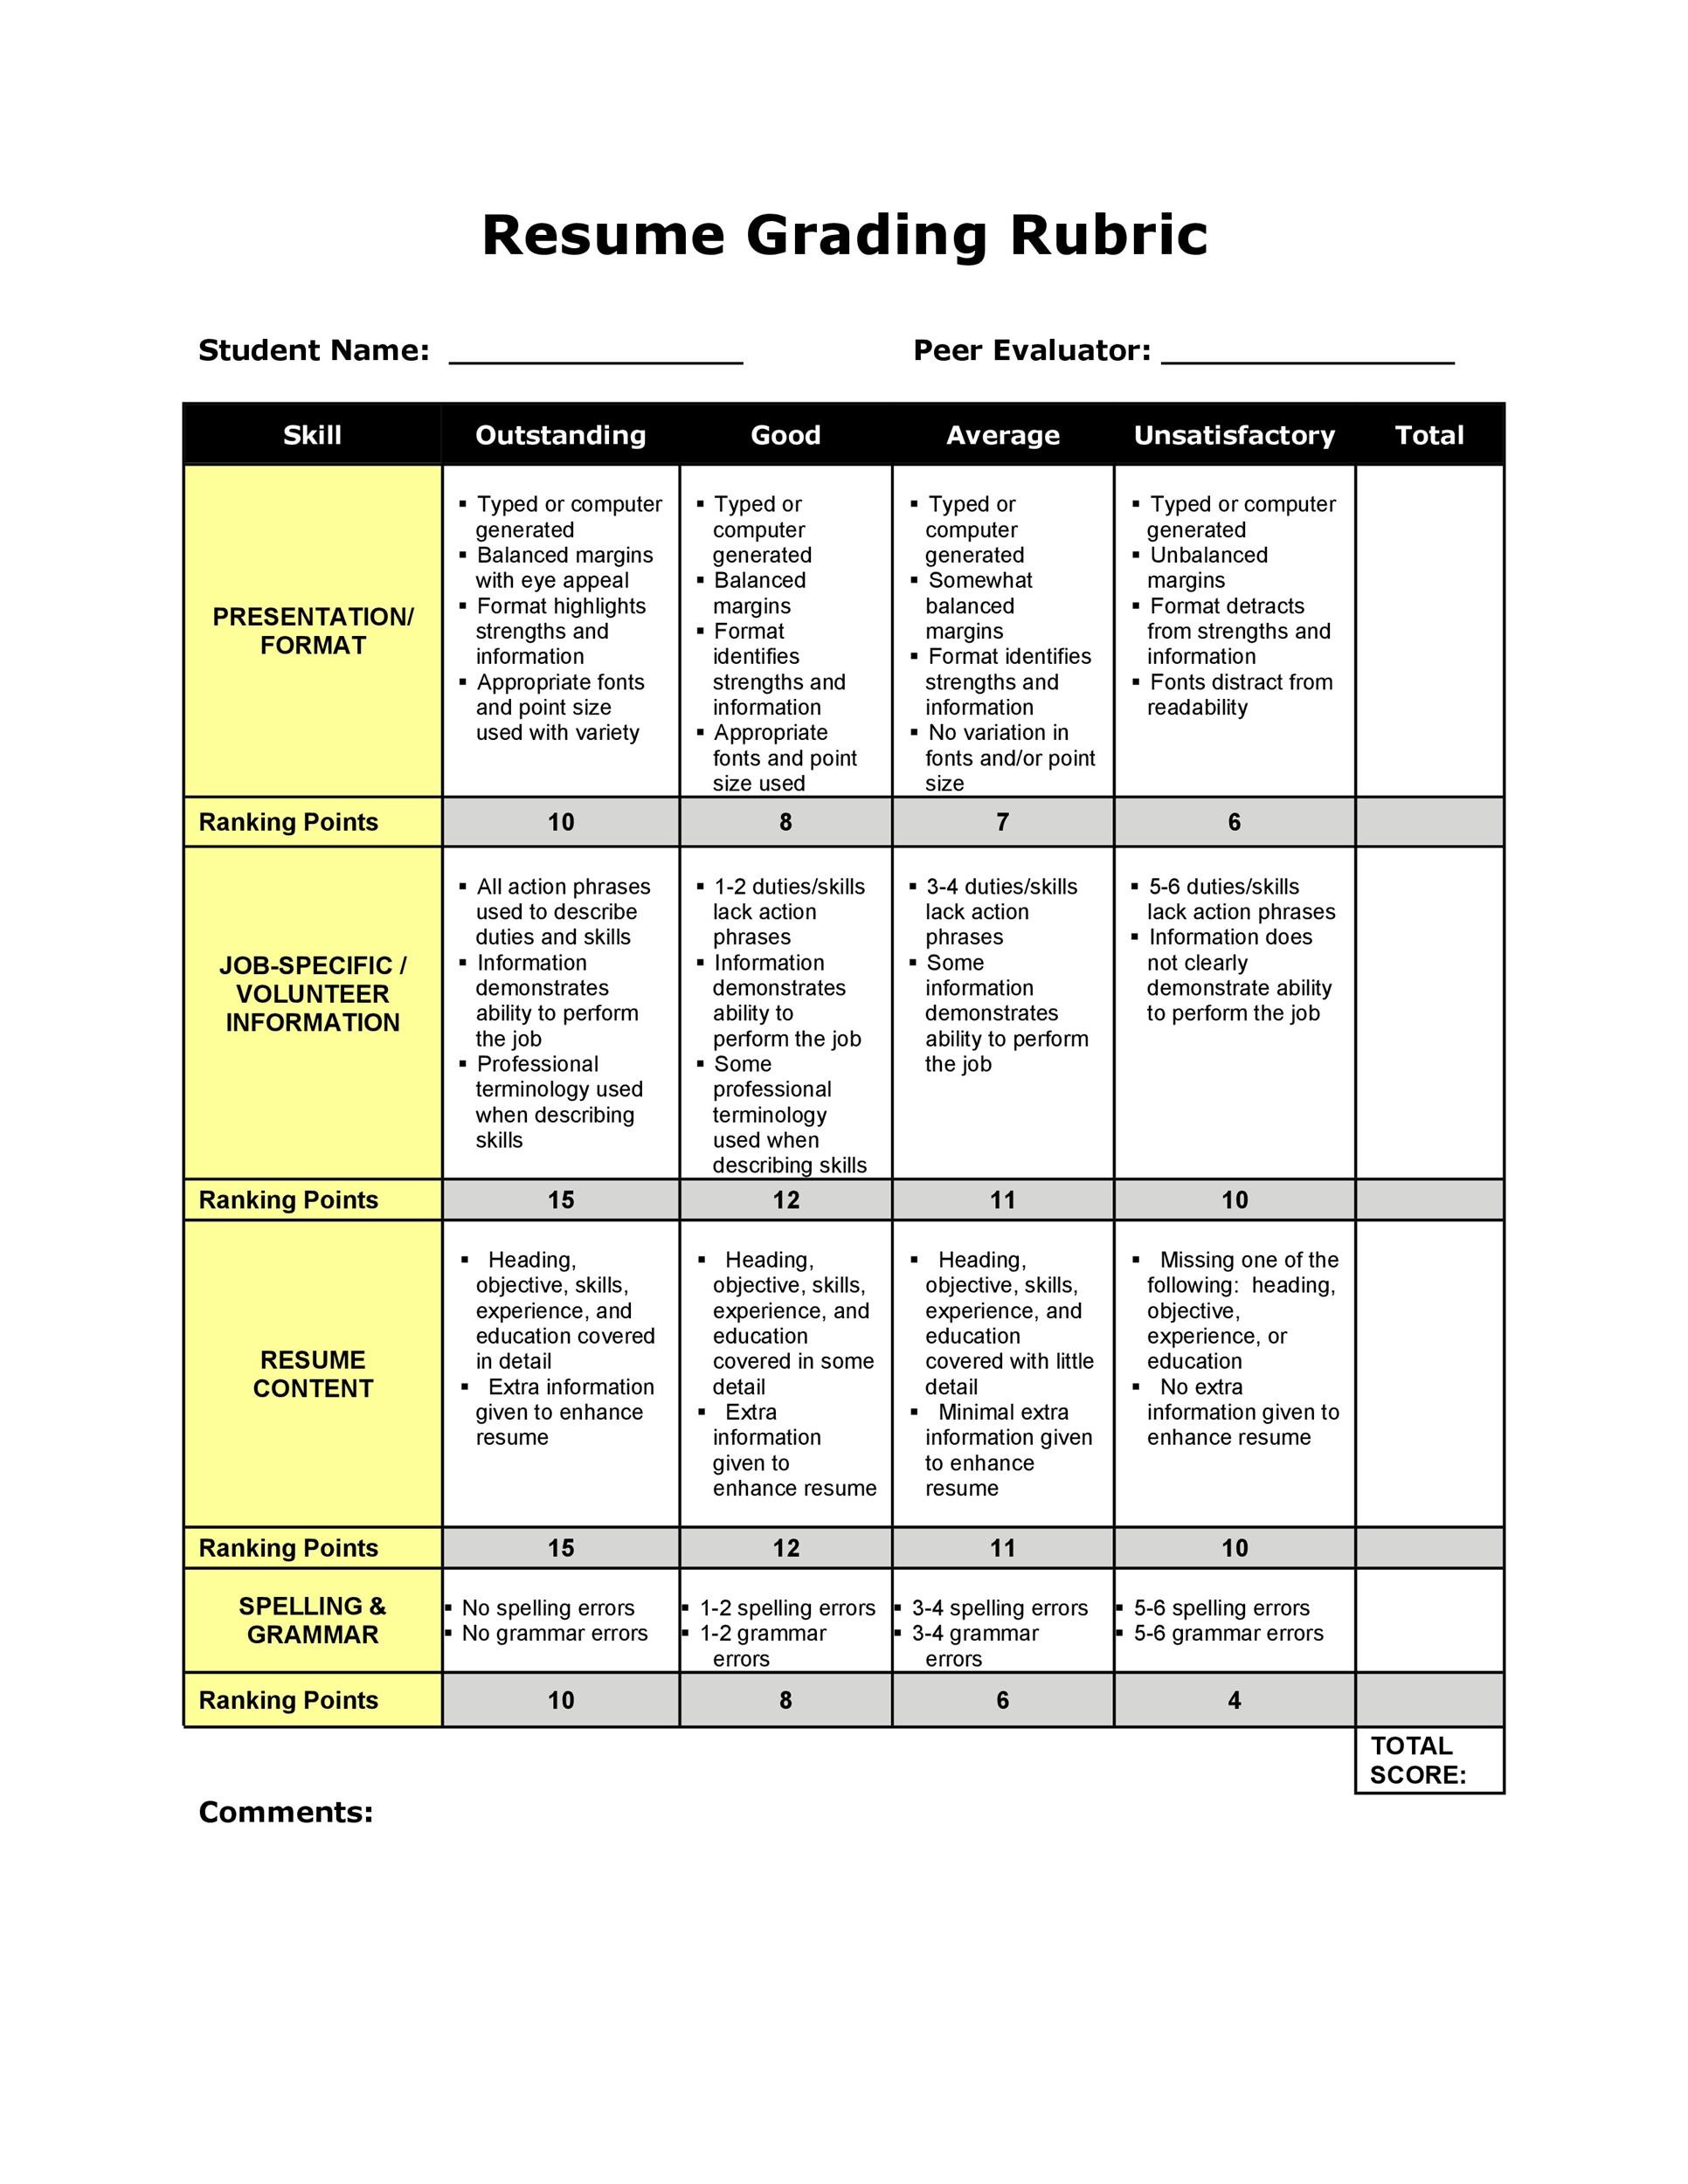 research project rubric editable